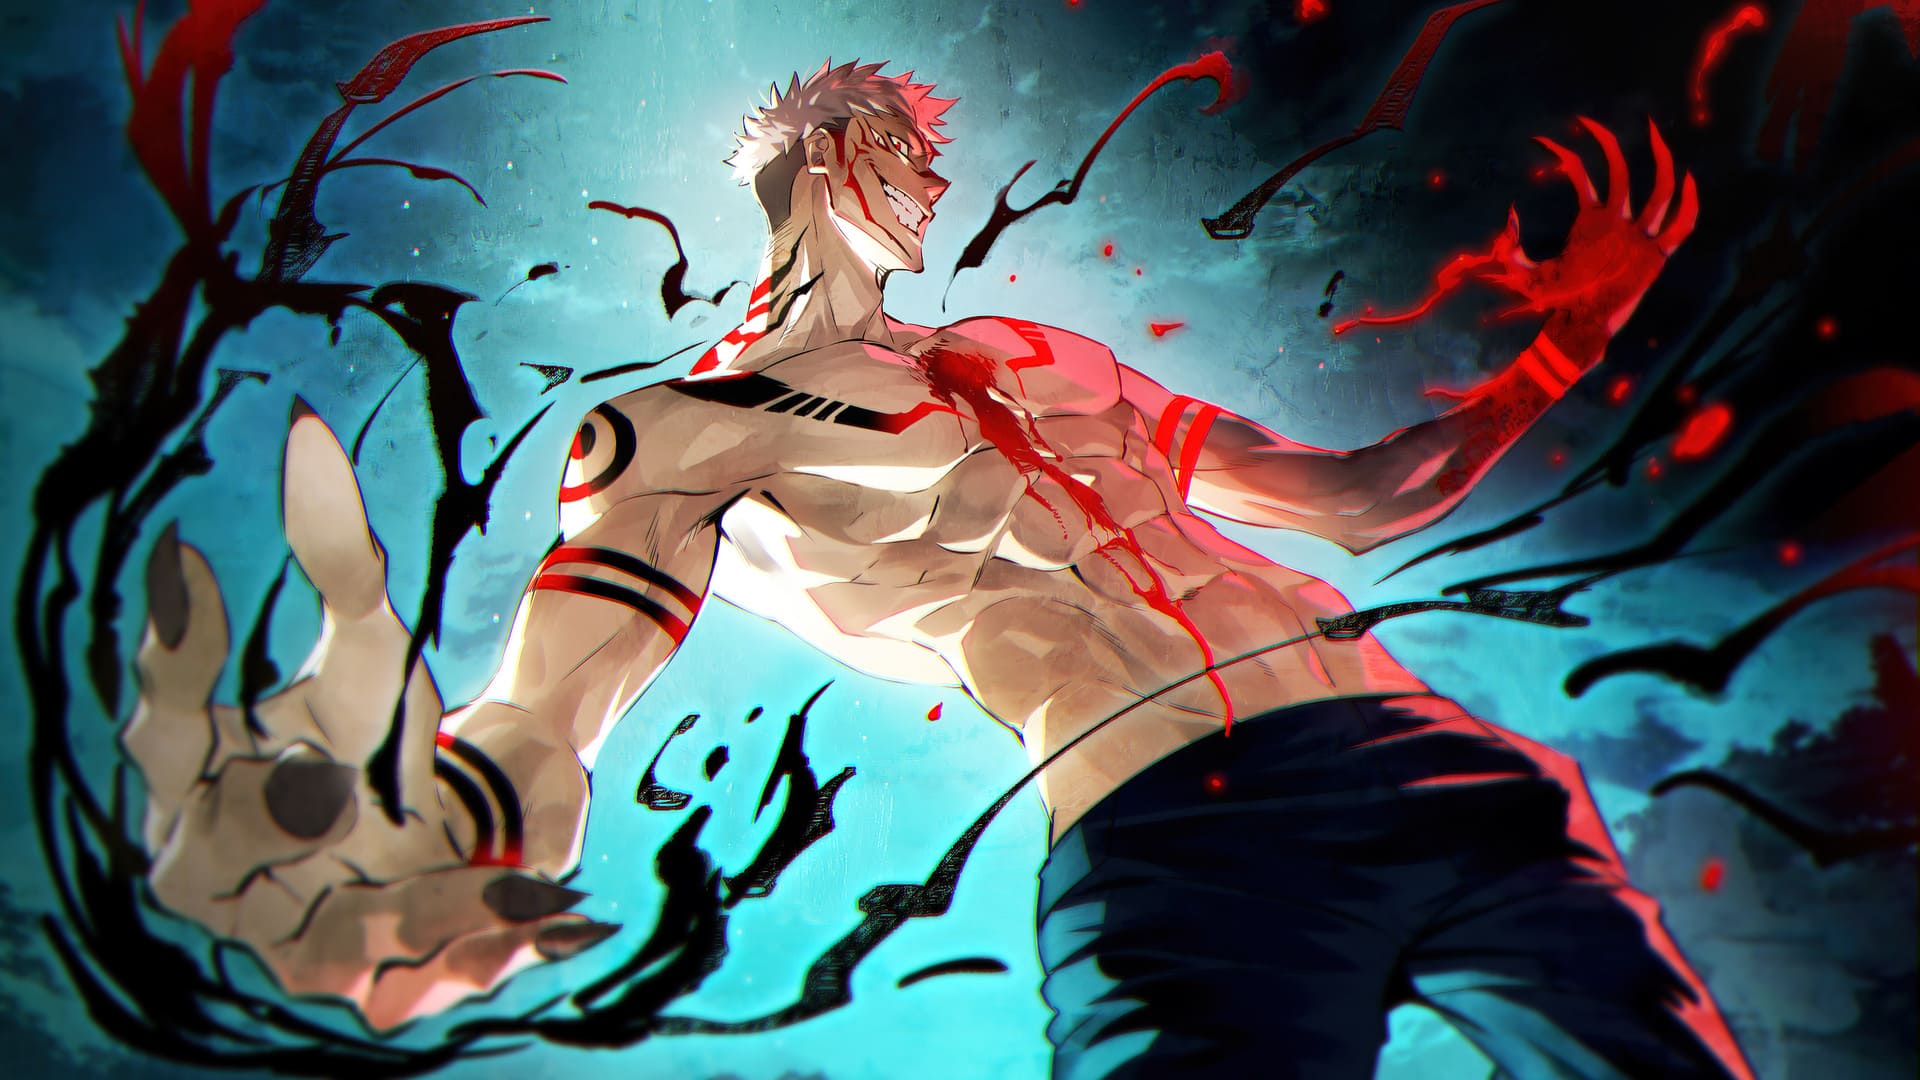 Cool Anime Wallpapers and Backgrounds - WallpaperCG